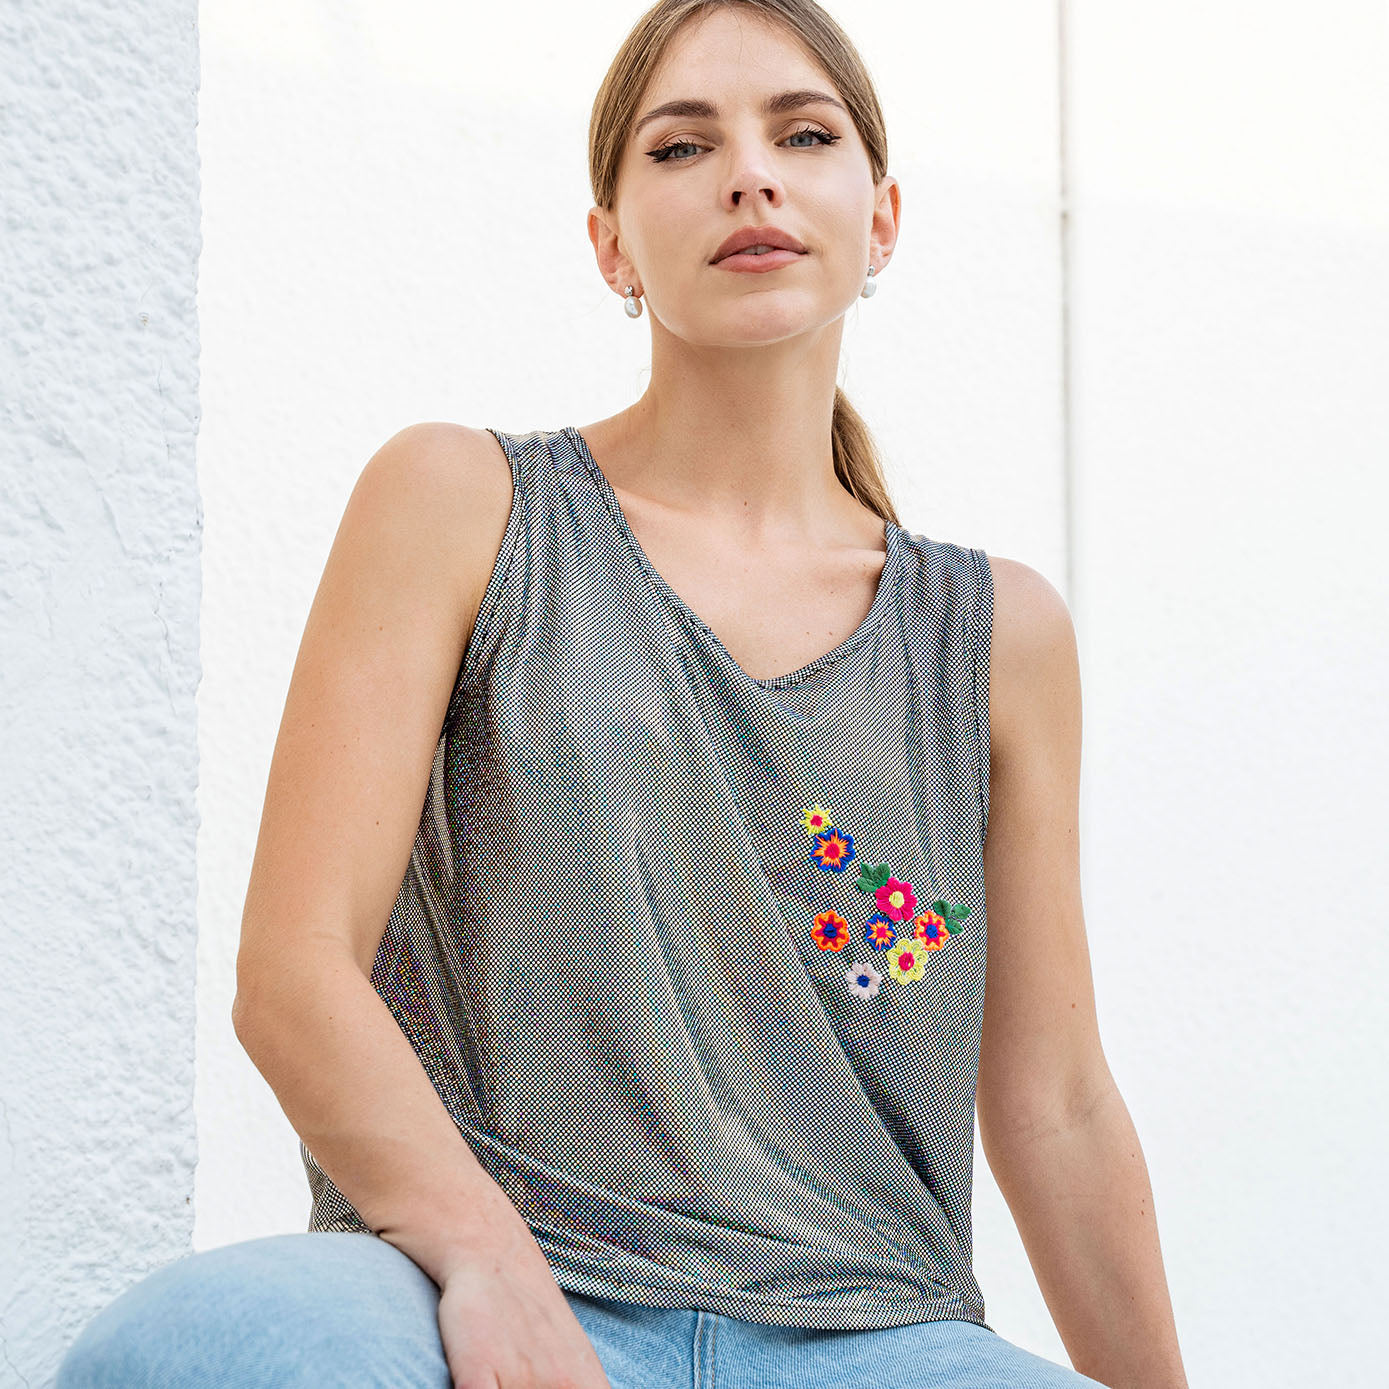 Metallic top with floral embroidery